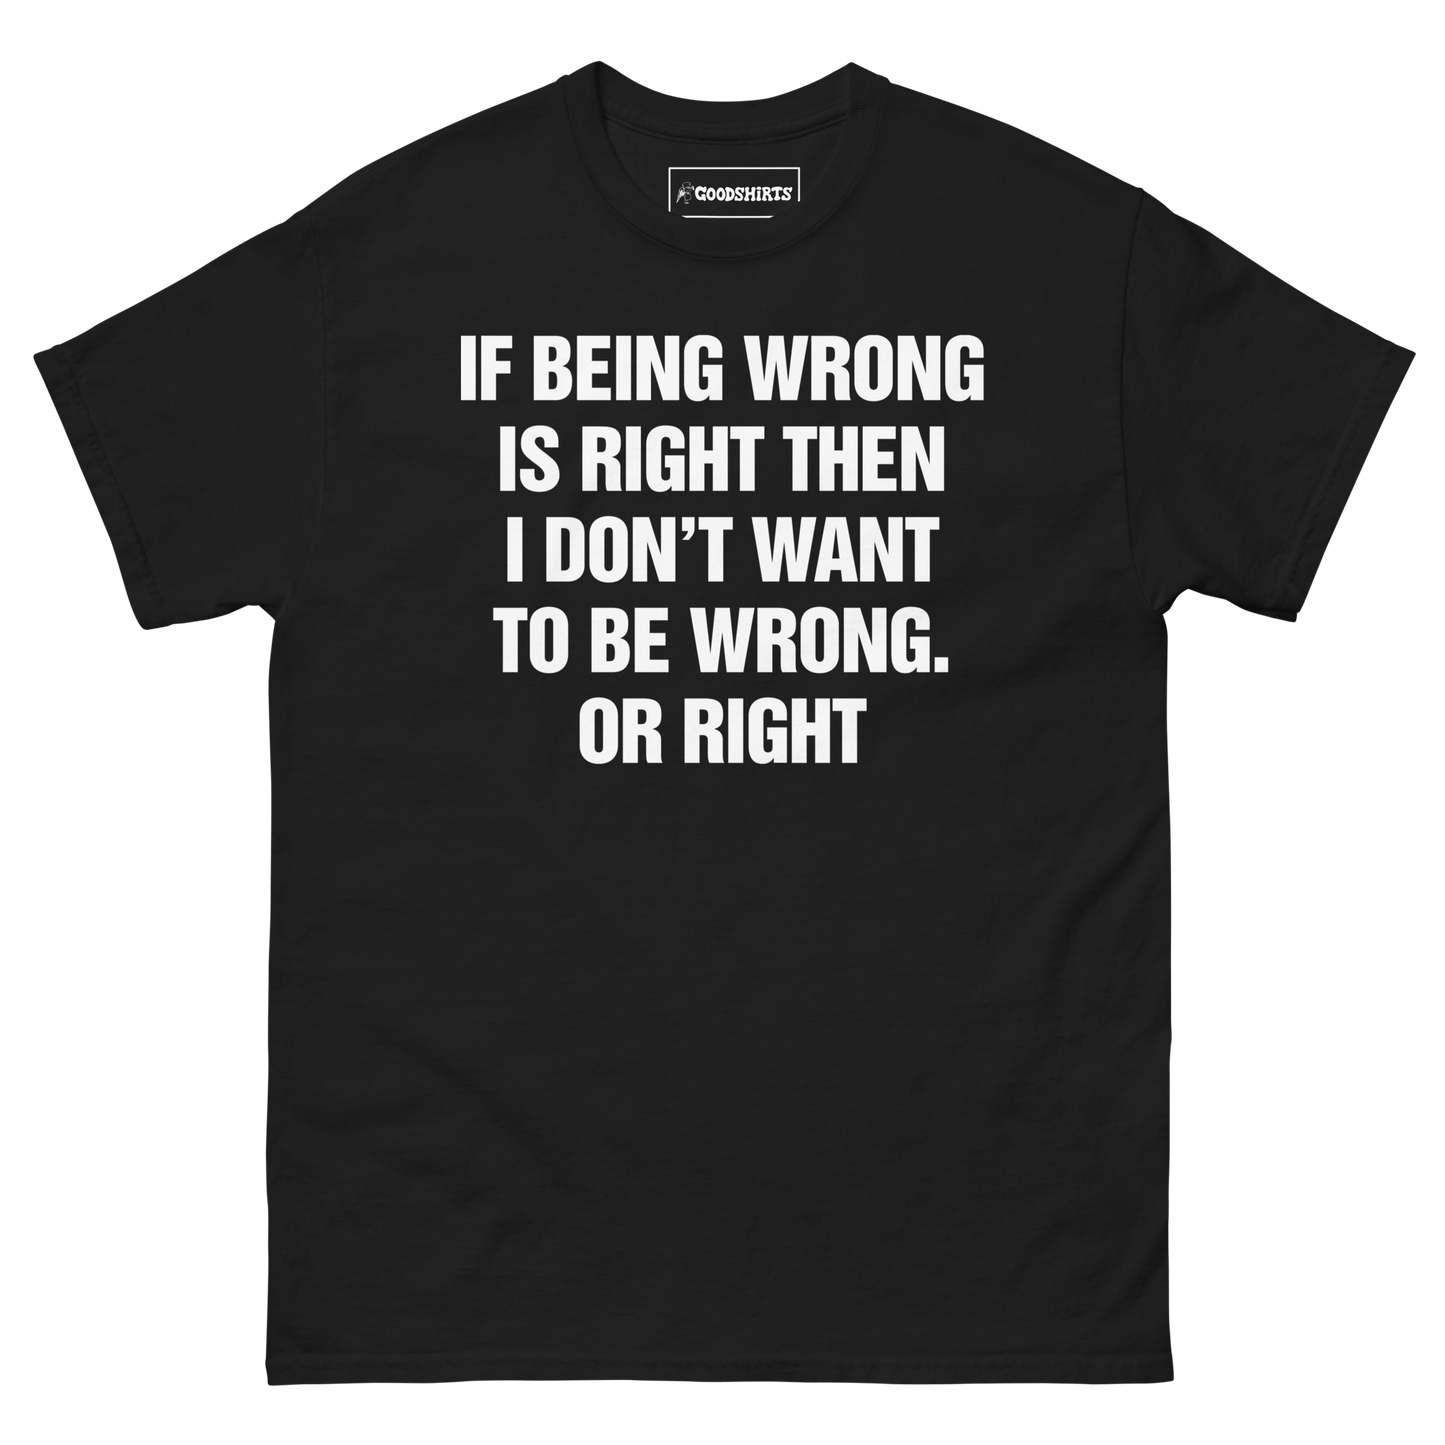 If Being Wrong Is Right, I Don't Want To Be Wrong. Or Right.